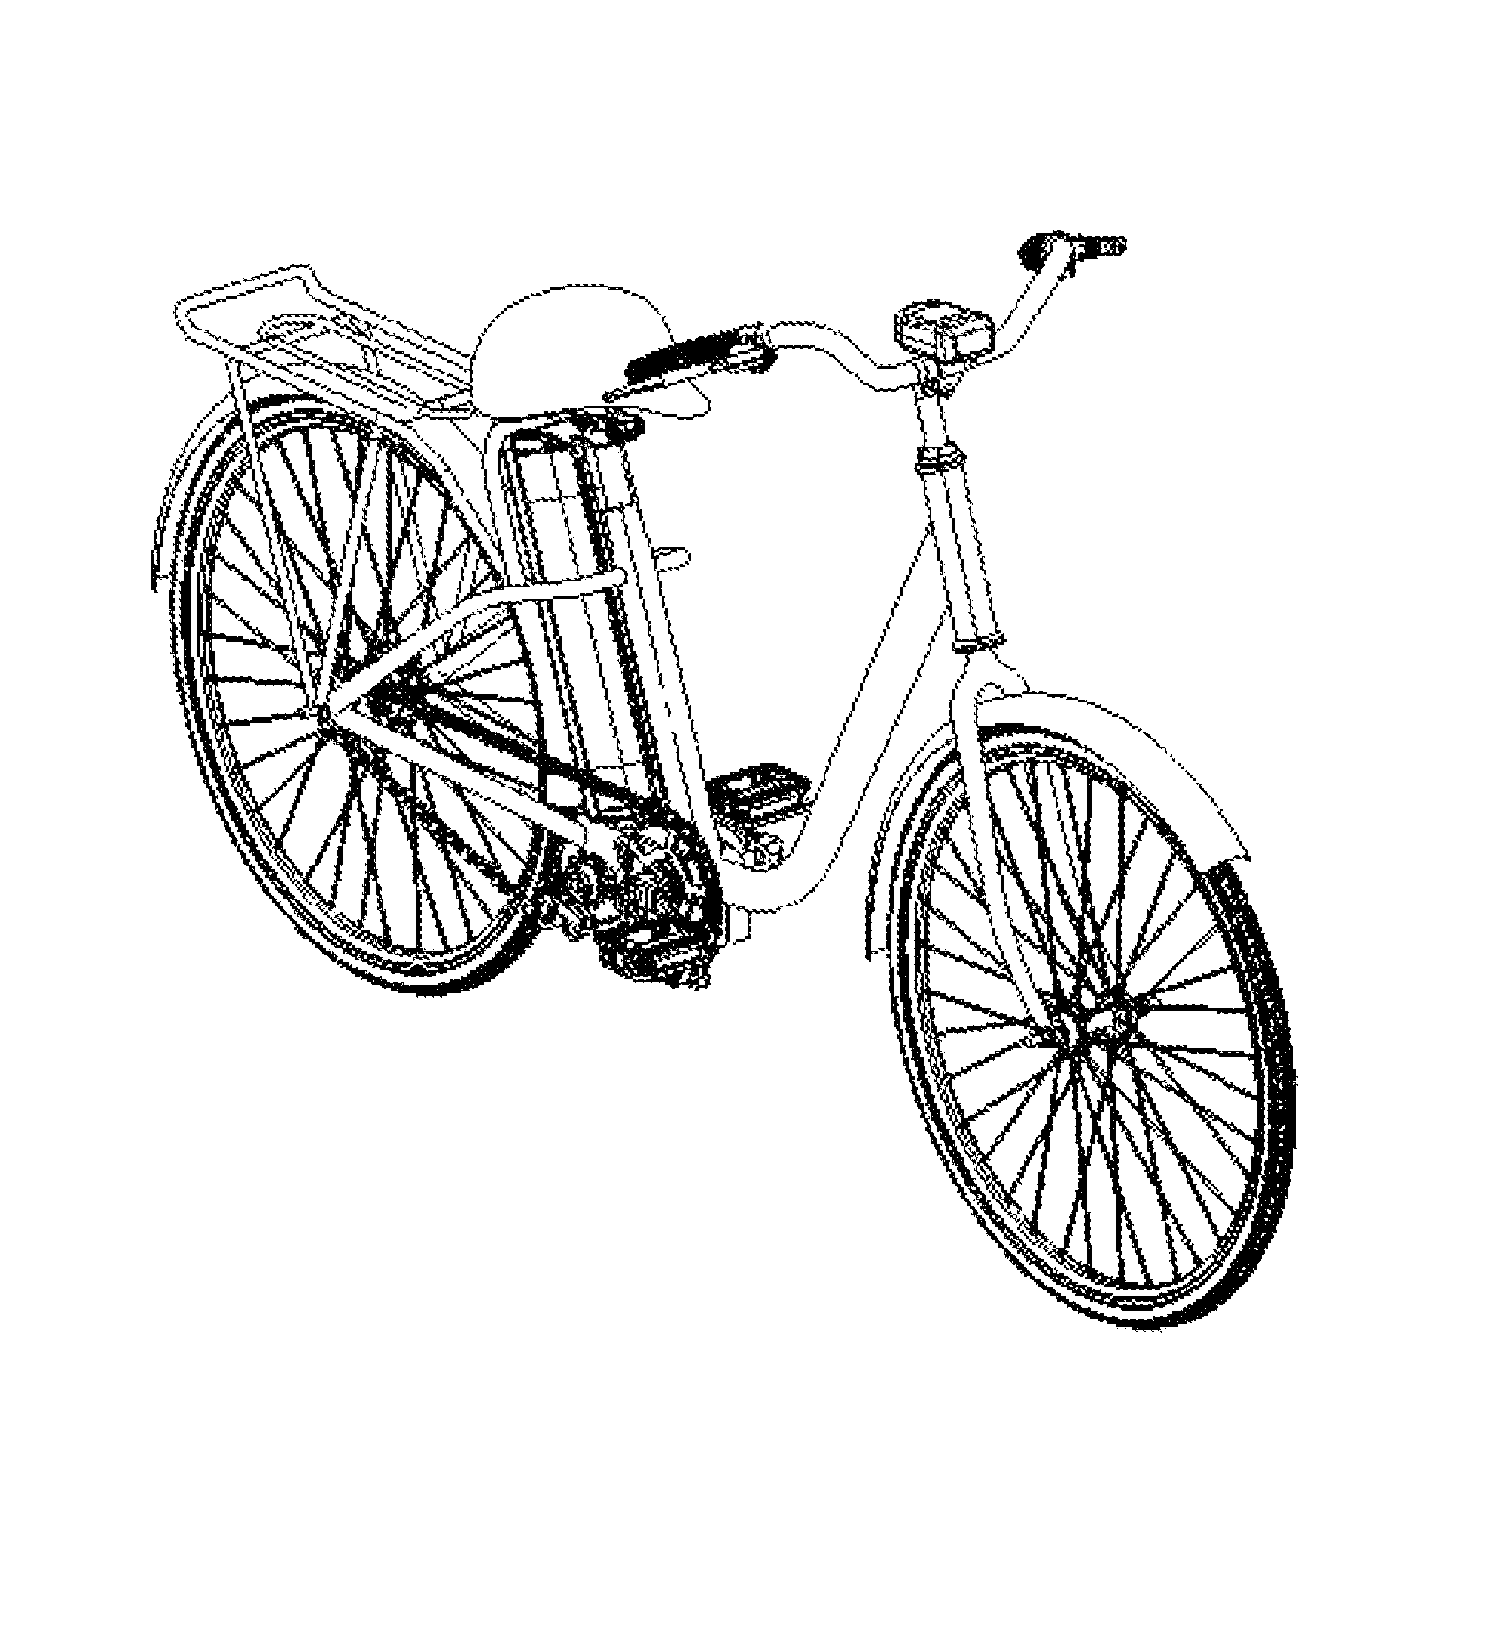 Middle electric motor drive unit for electric bicycle